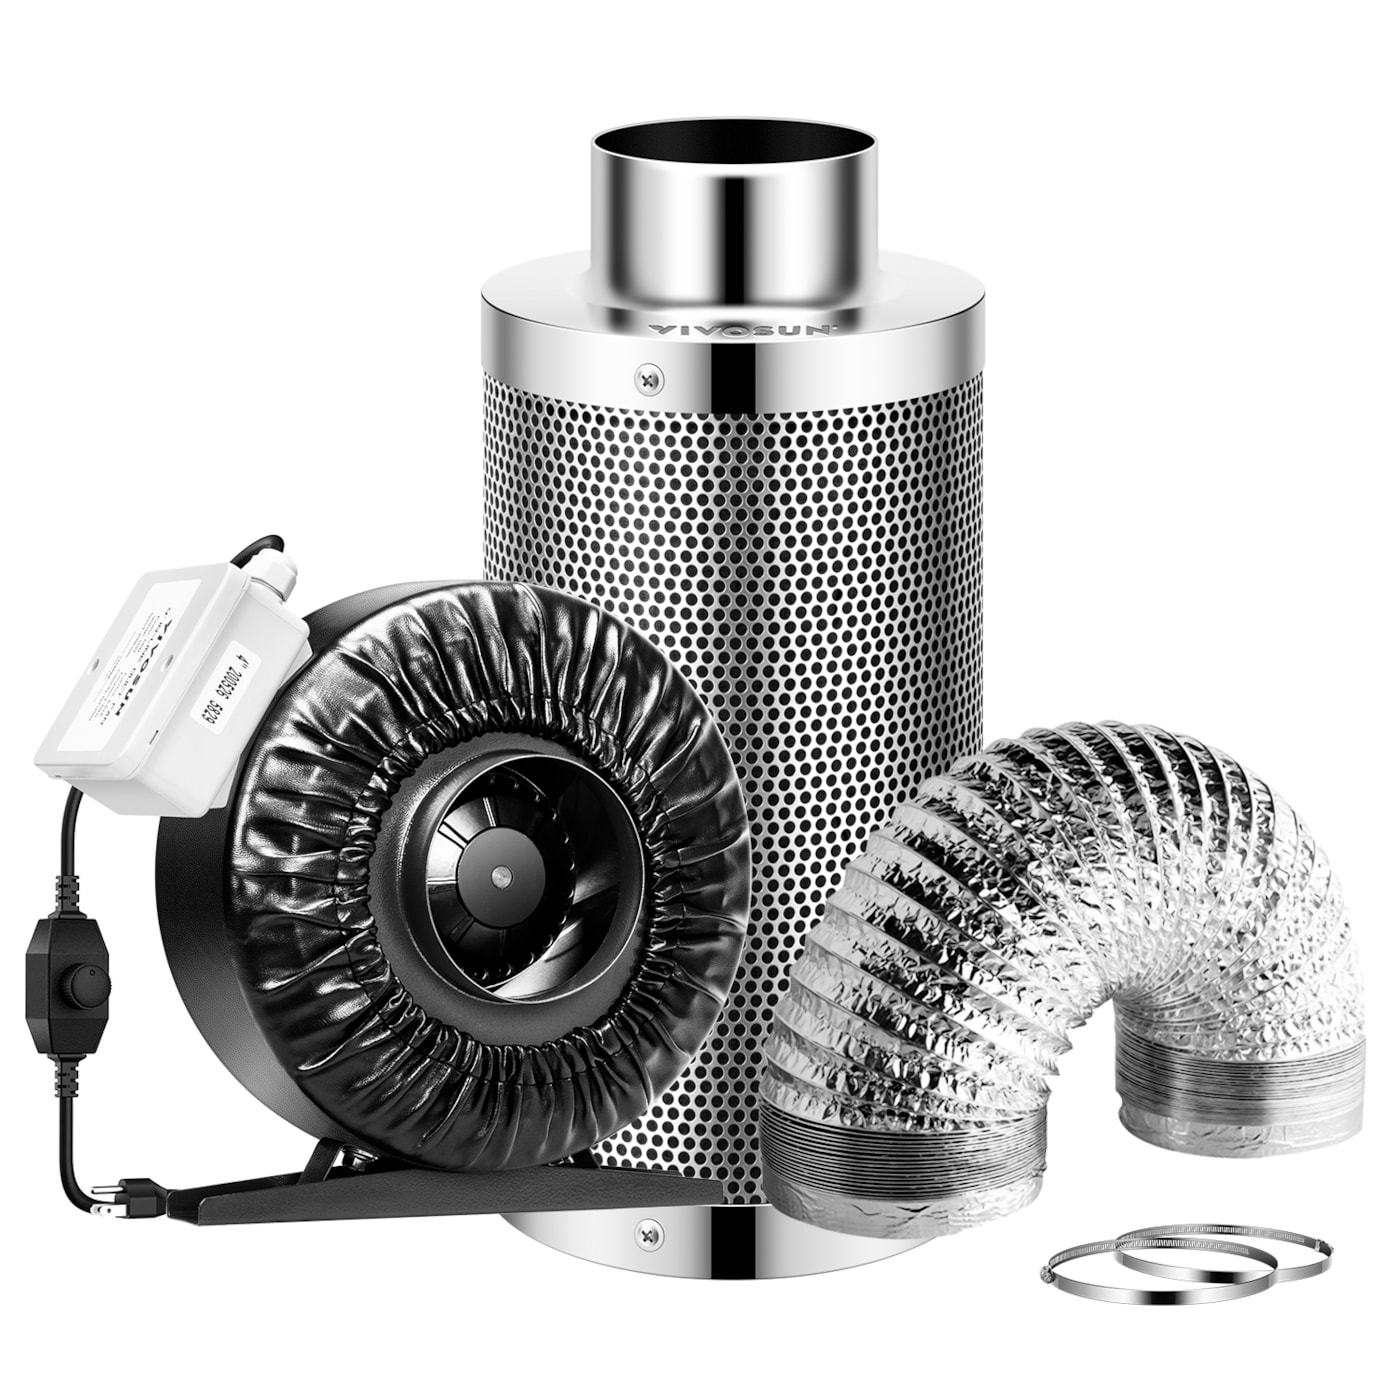 VIVOSUN 4-Inch 203 CFM Inline Duct Fan Kit with Carbon Filter and Ducting